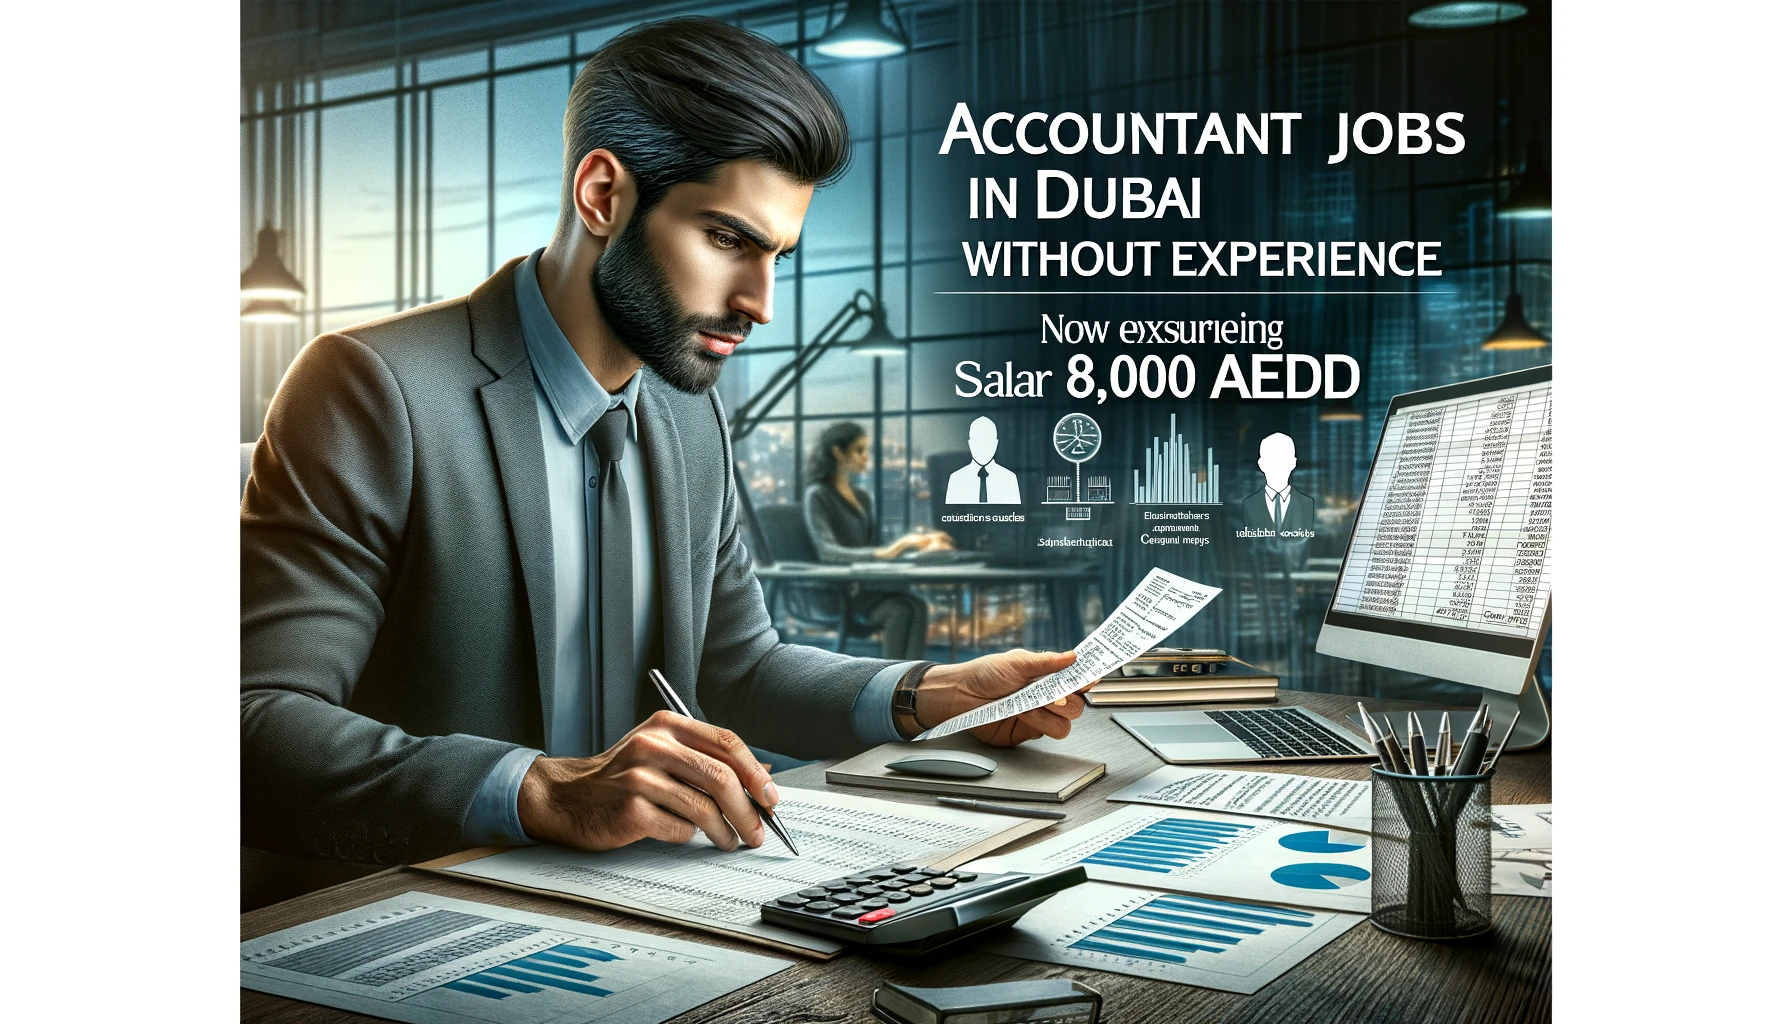 Accountant jobs in Dubai without experience with salary 8,000 AED